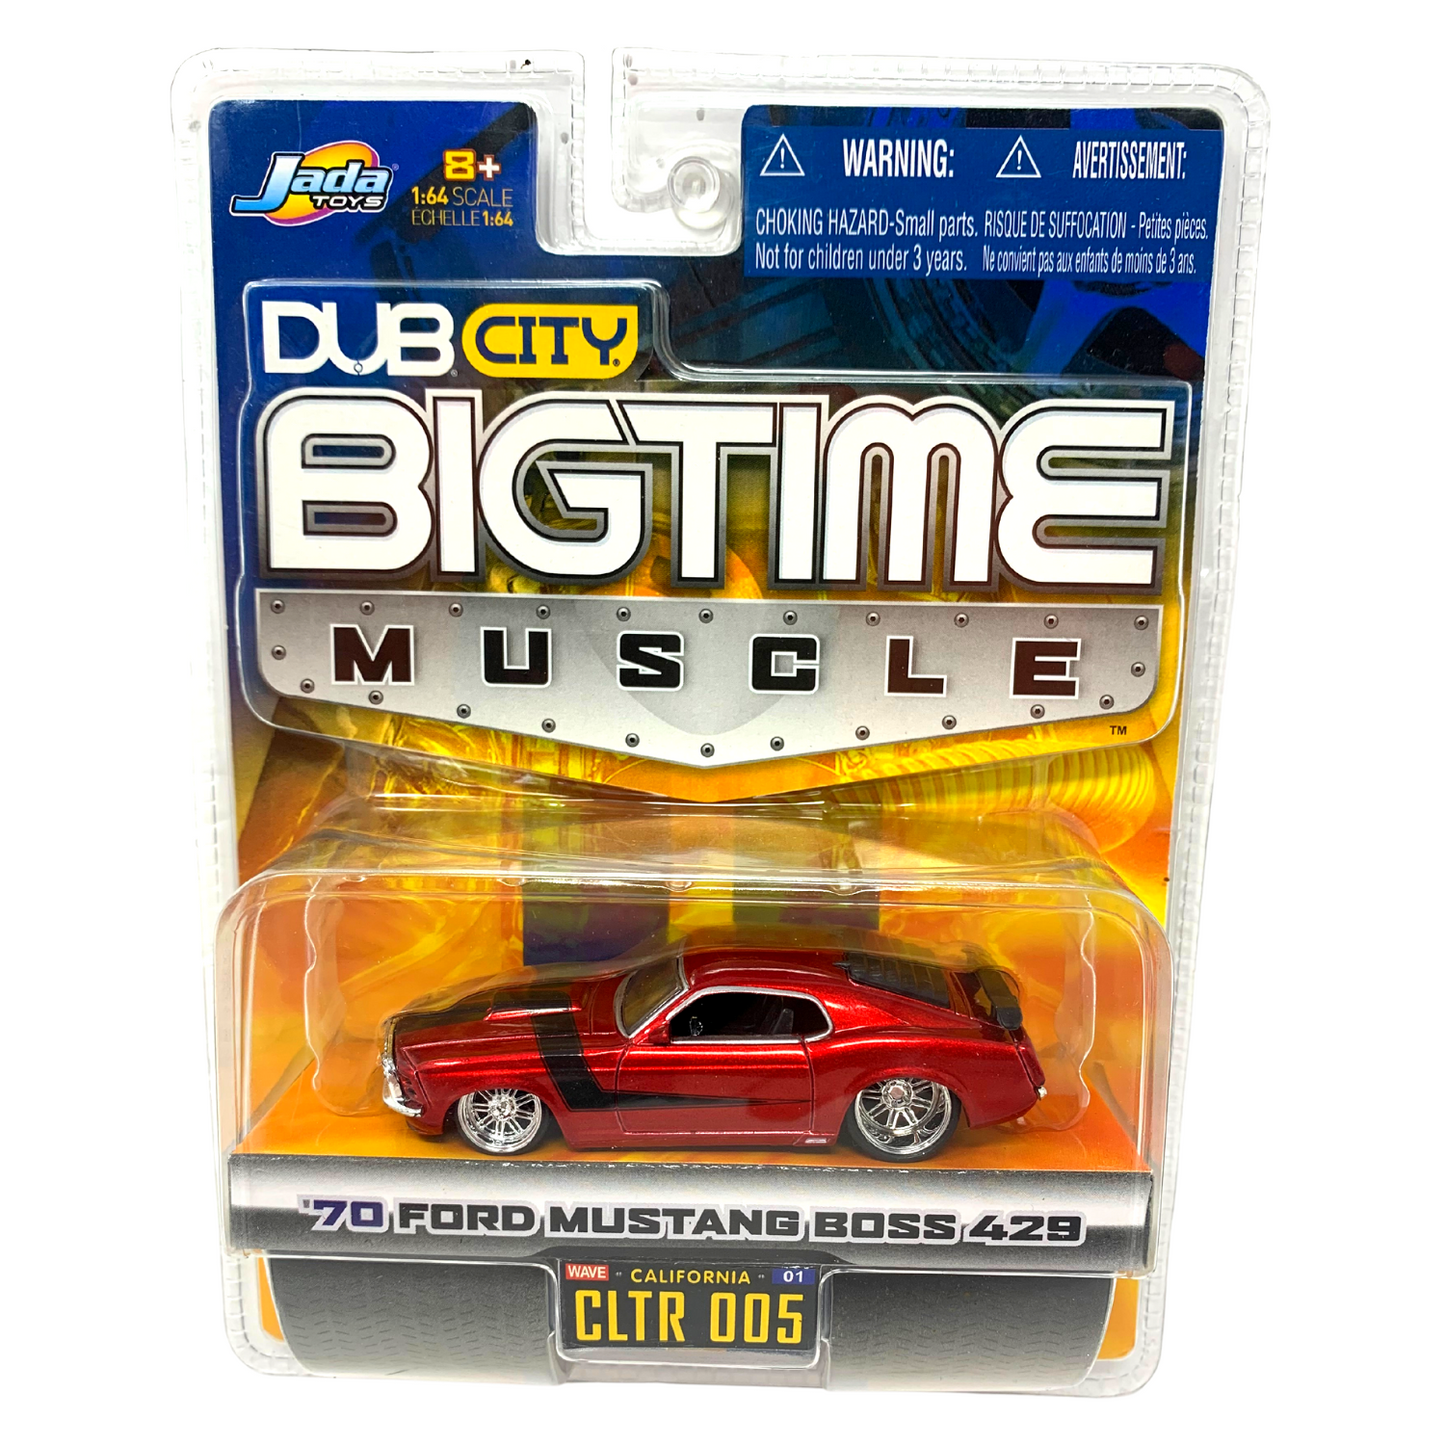 Jada Dub City Bigtime Muscle '70 Ford Mustang Boss 429 1:64 Diecast